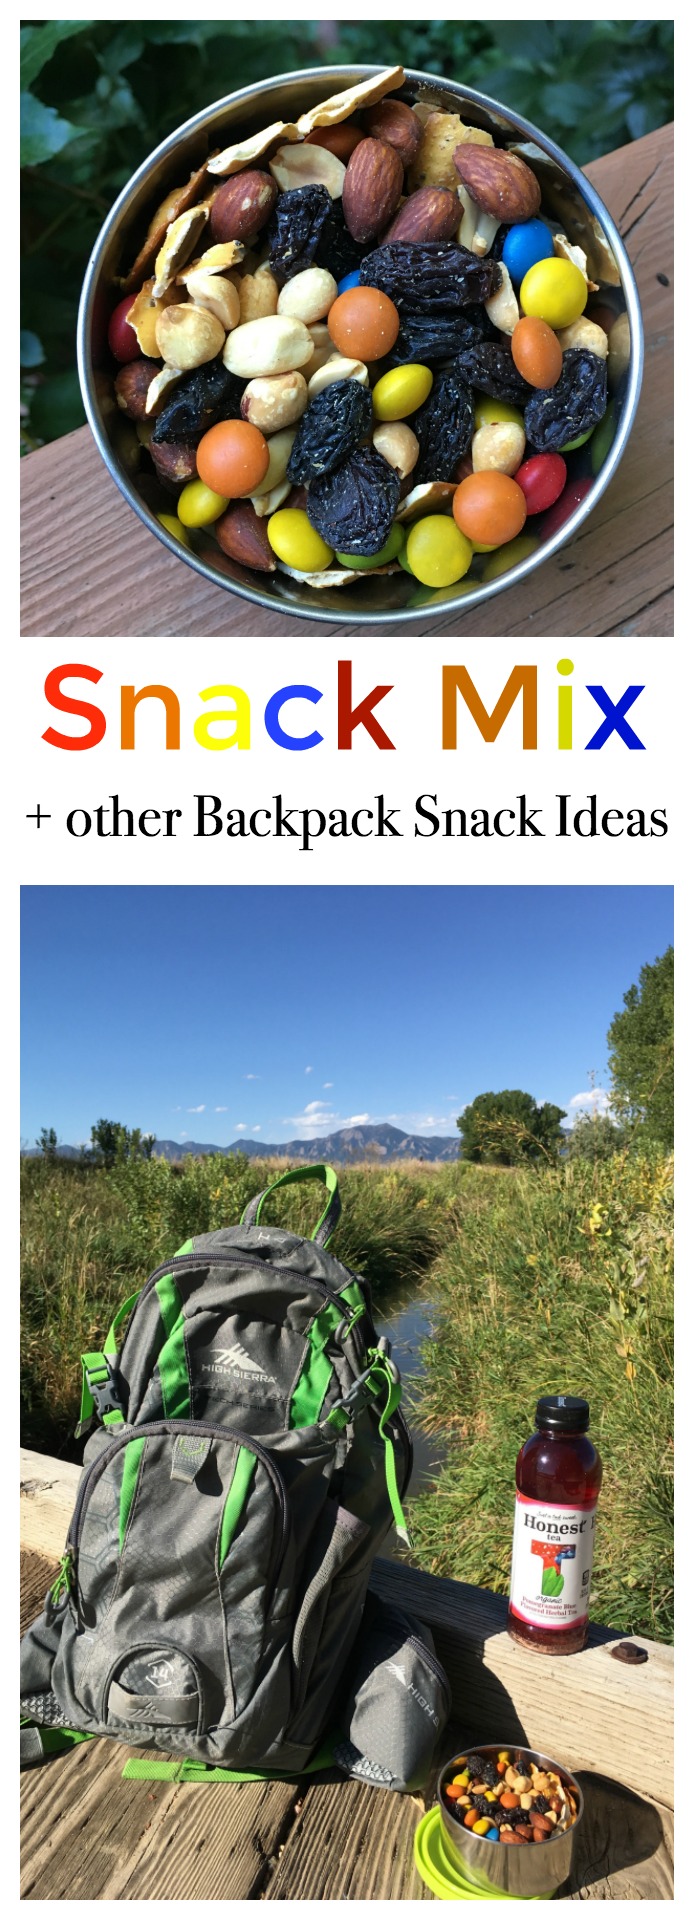 Backpack Snacks for Organic Month